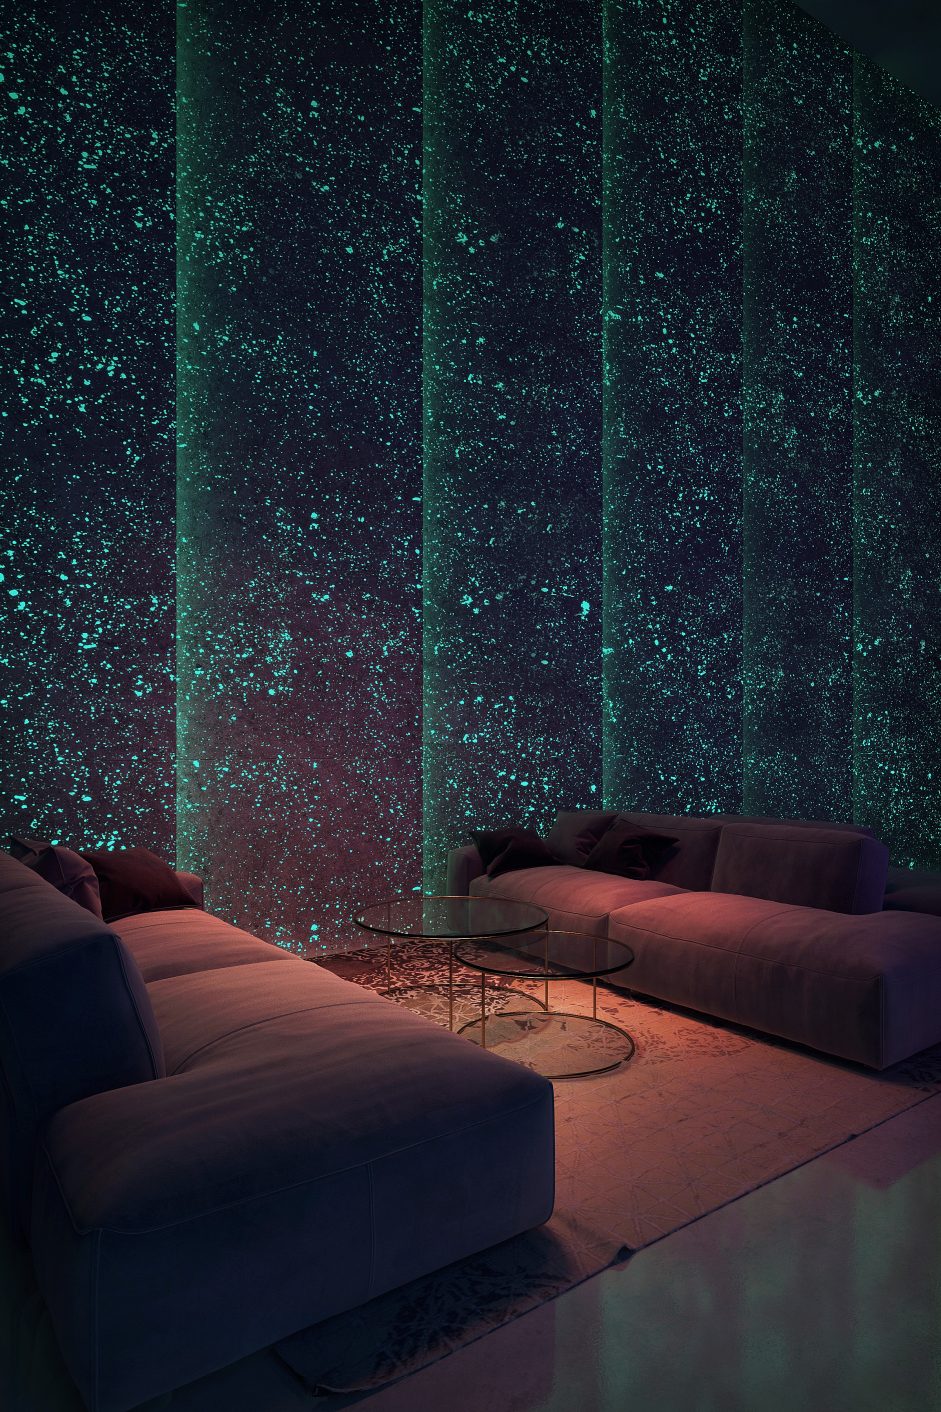 Visualization of a night club with modern light design on wall